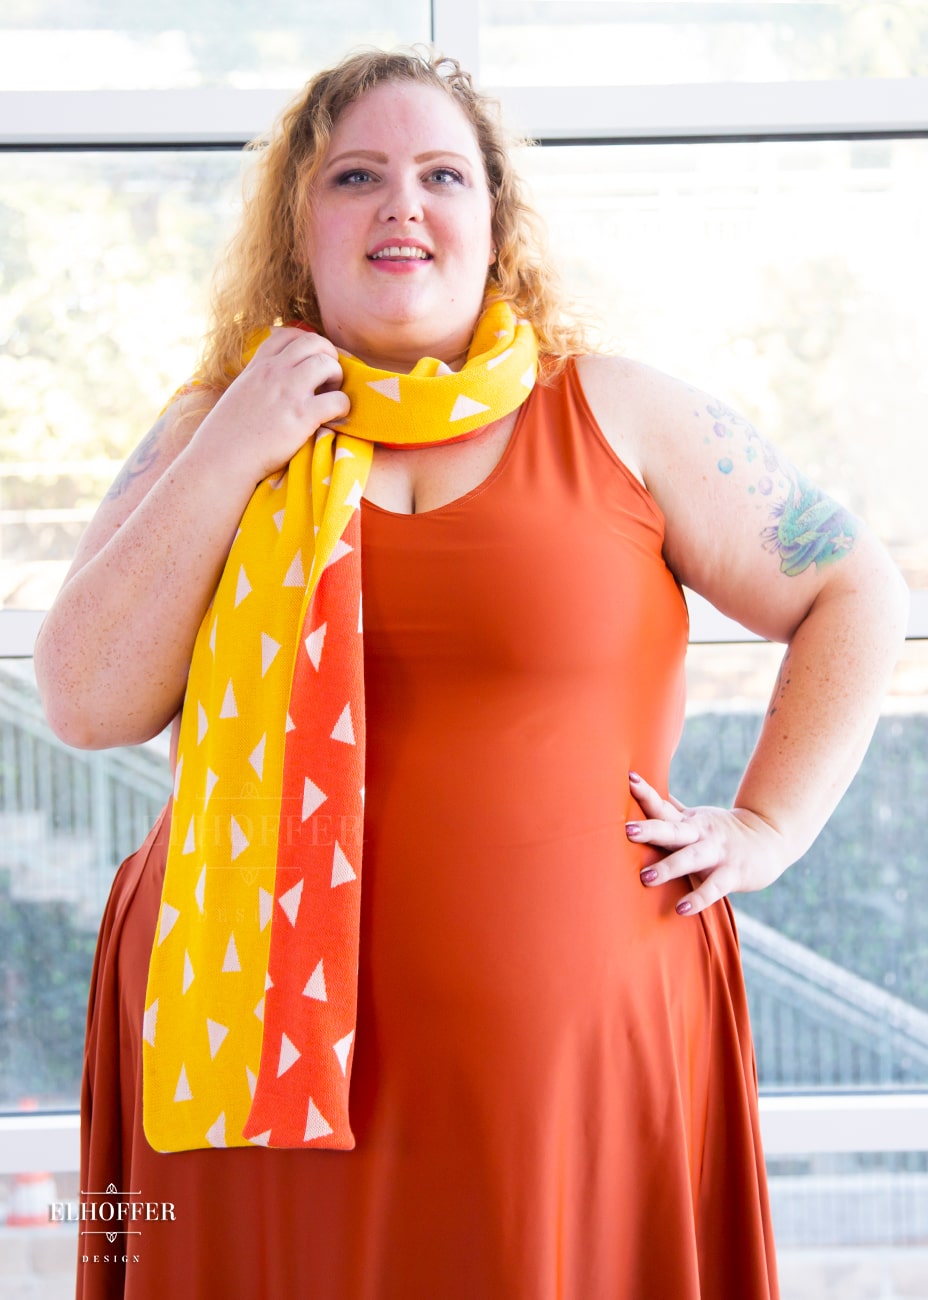 Bee, a fair skinned 3xl model with medium length curly blonde hair, is smiling while wearing a reversible knit scarf.  One side of the scarf is orange with white triangles and the other side is yellow with white triangles.